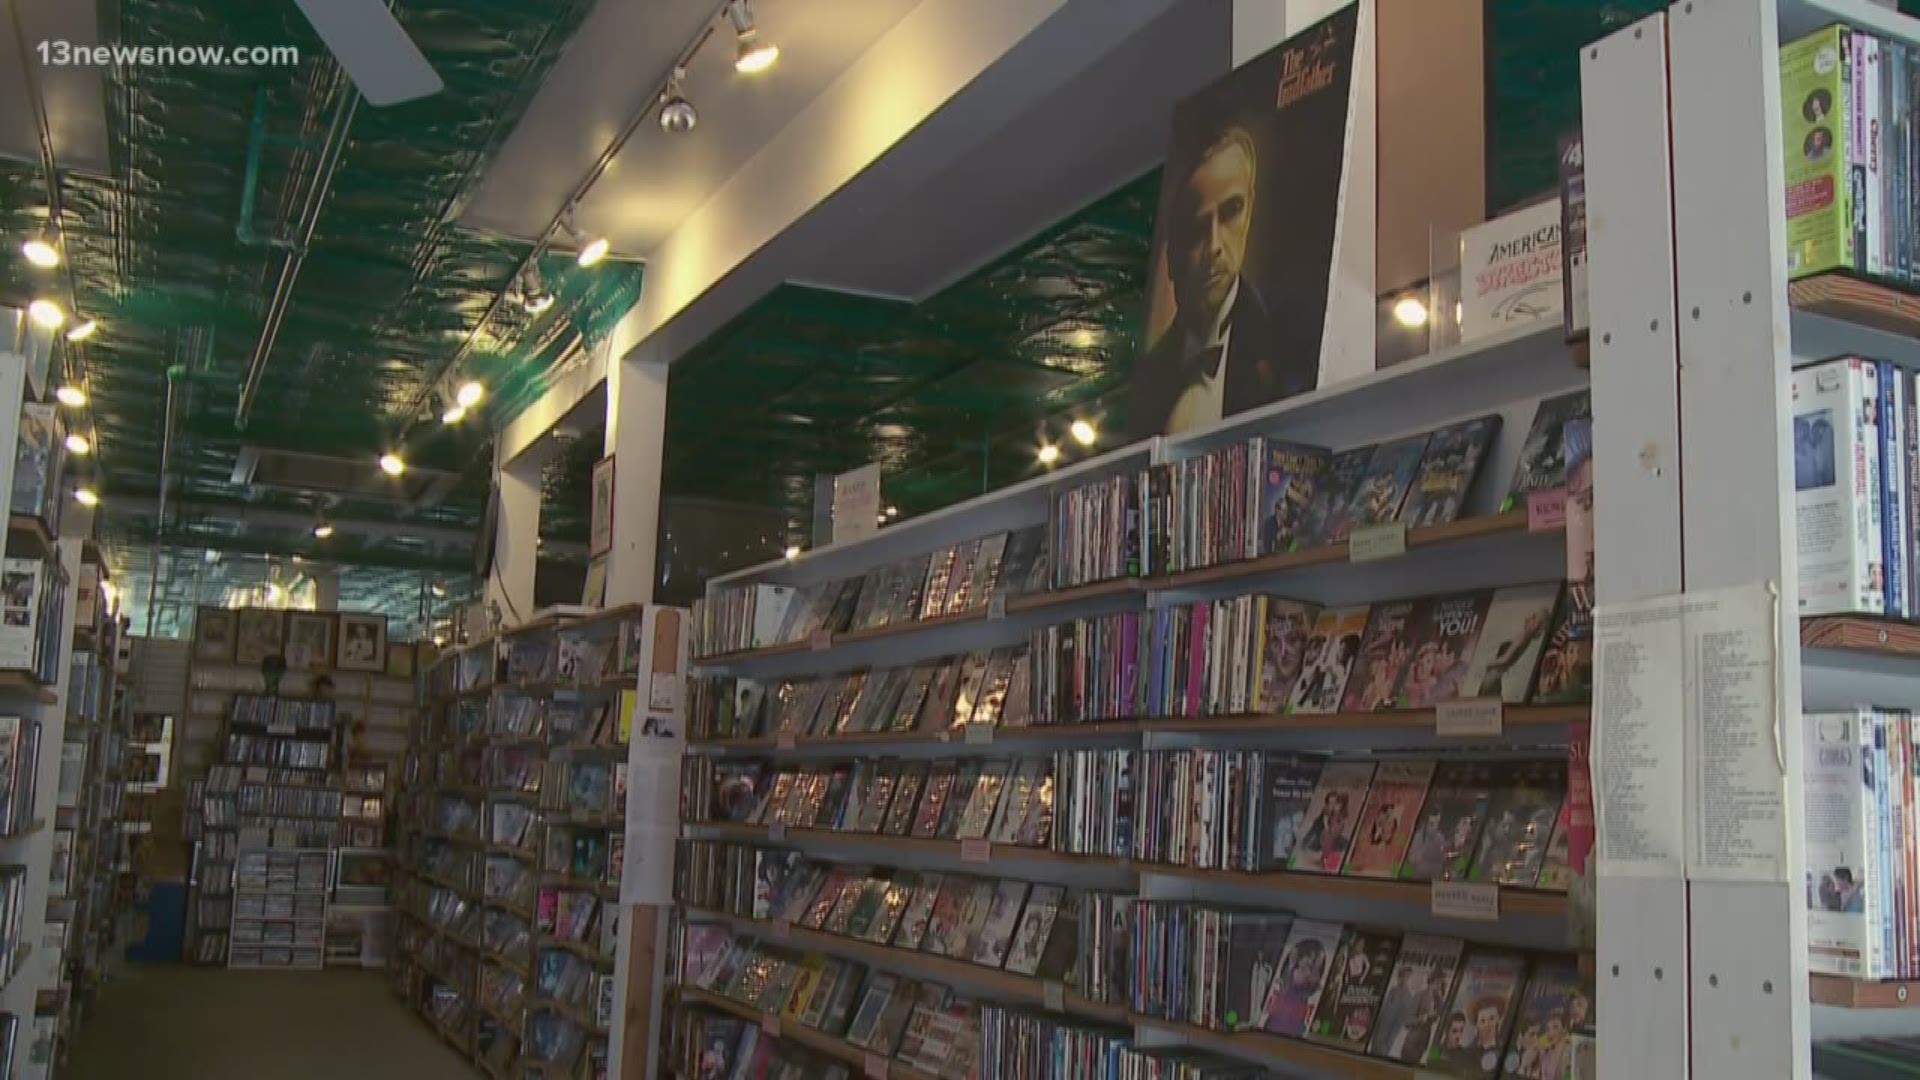 Naro Video in Norfolk is closing its doors for good. The business rented out its final video ever.